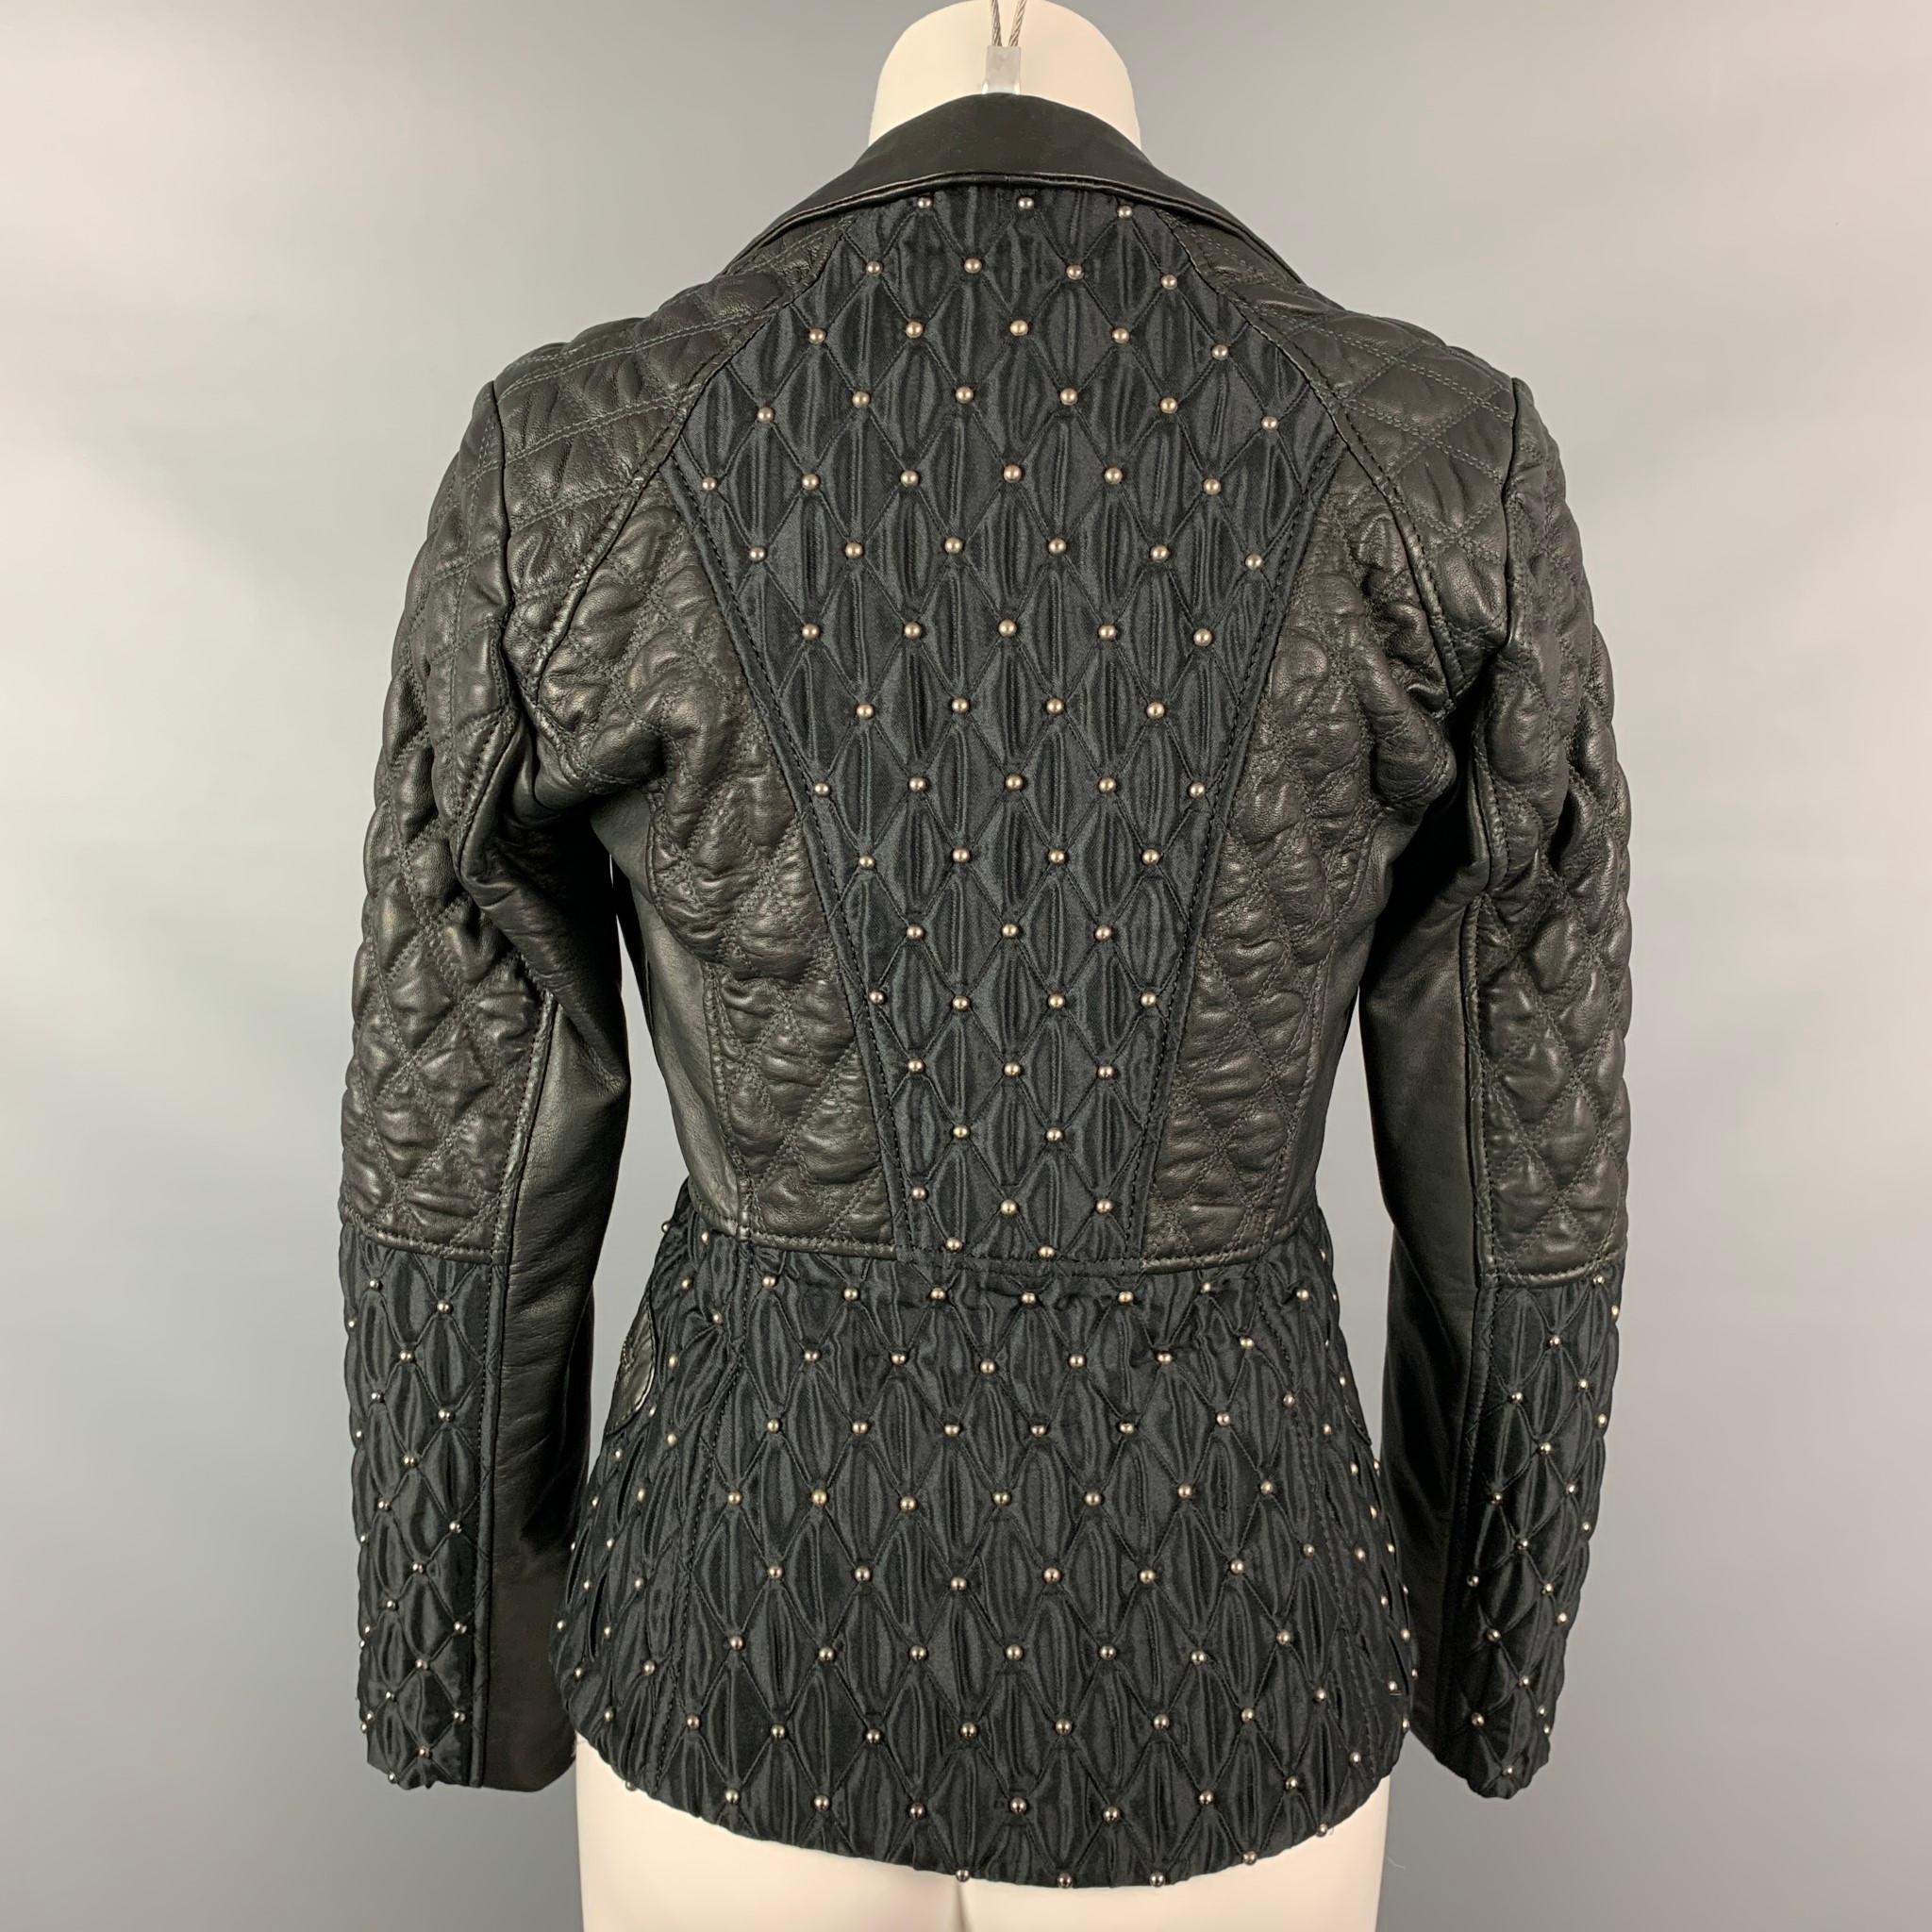 Women's JUST CAVALLI Size 4 Black Studded Acetate / Viscose Quilted Notch Lapel Jacket